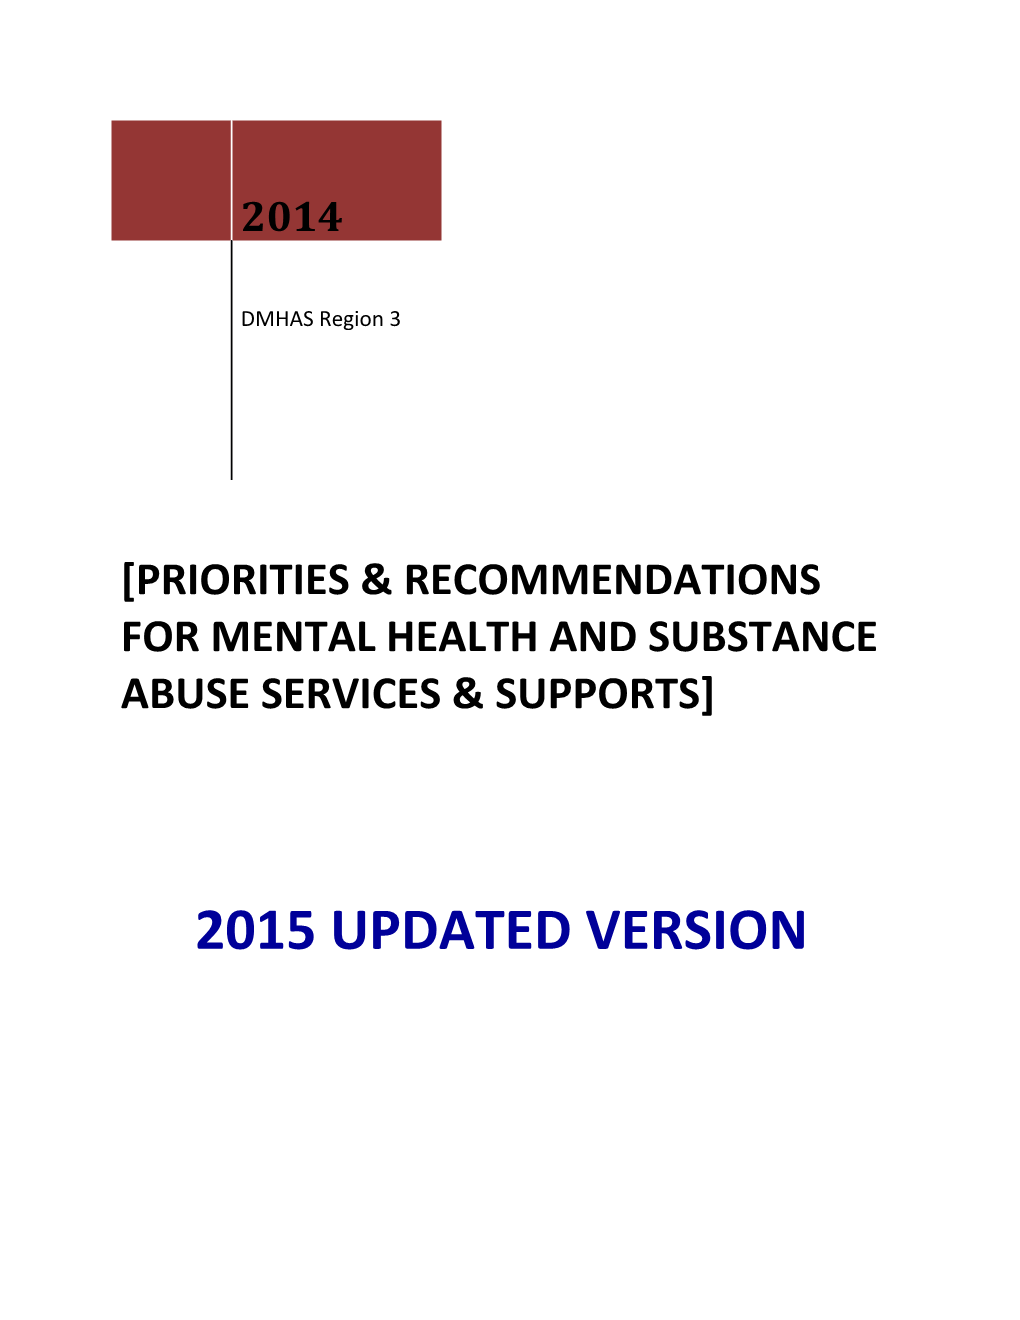 PRIORITIES & RECOMMENDATIONS for MENTAL HEALTH and SUBSTANCE ABUSE SERVICES & Supports